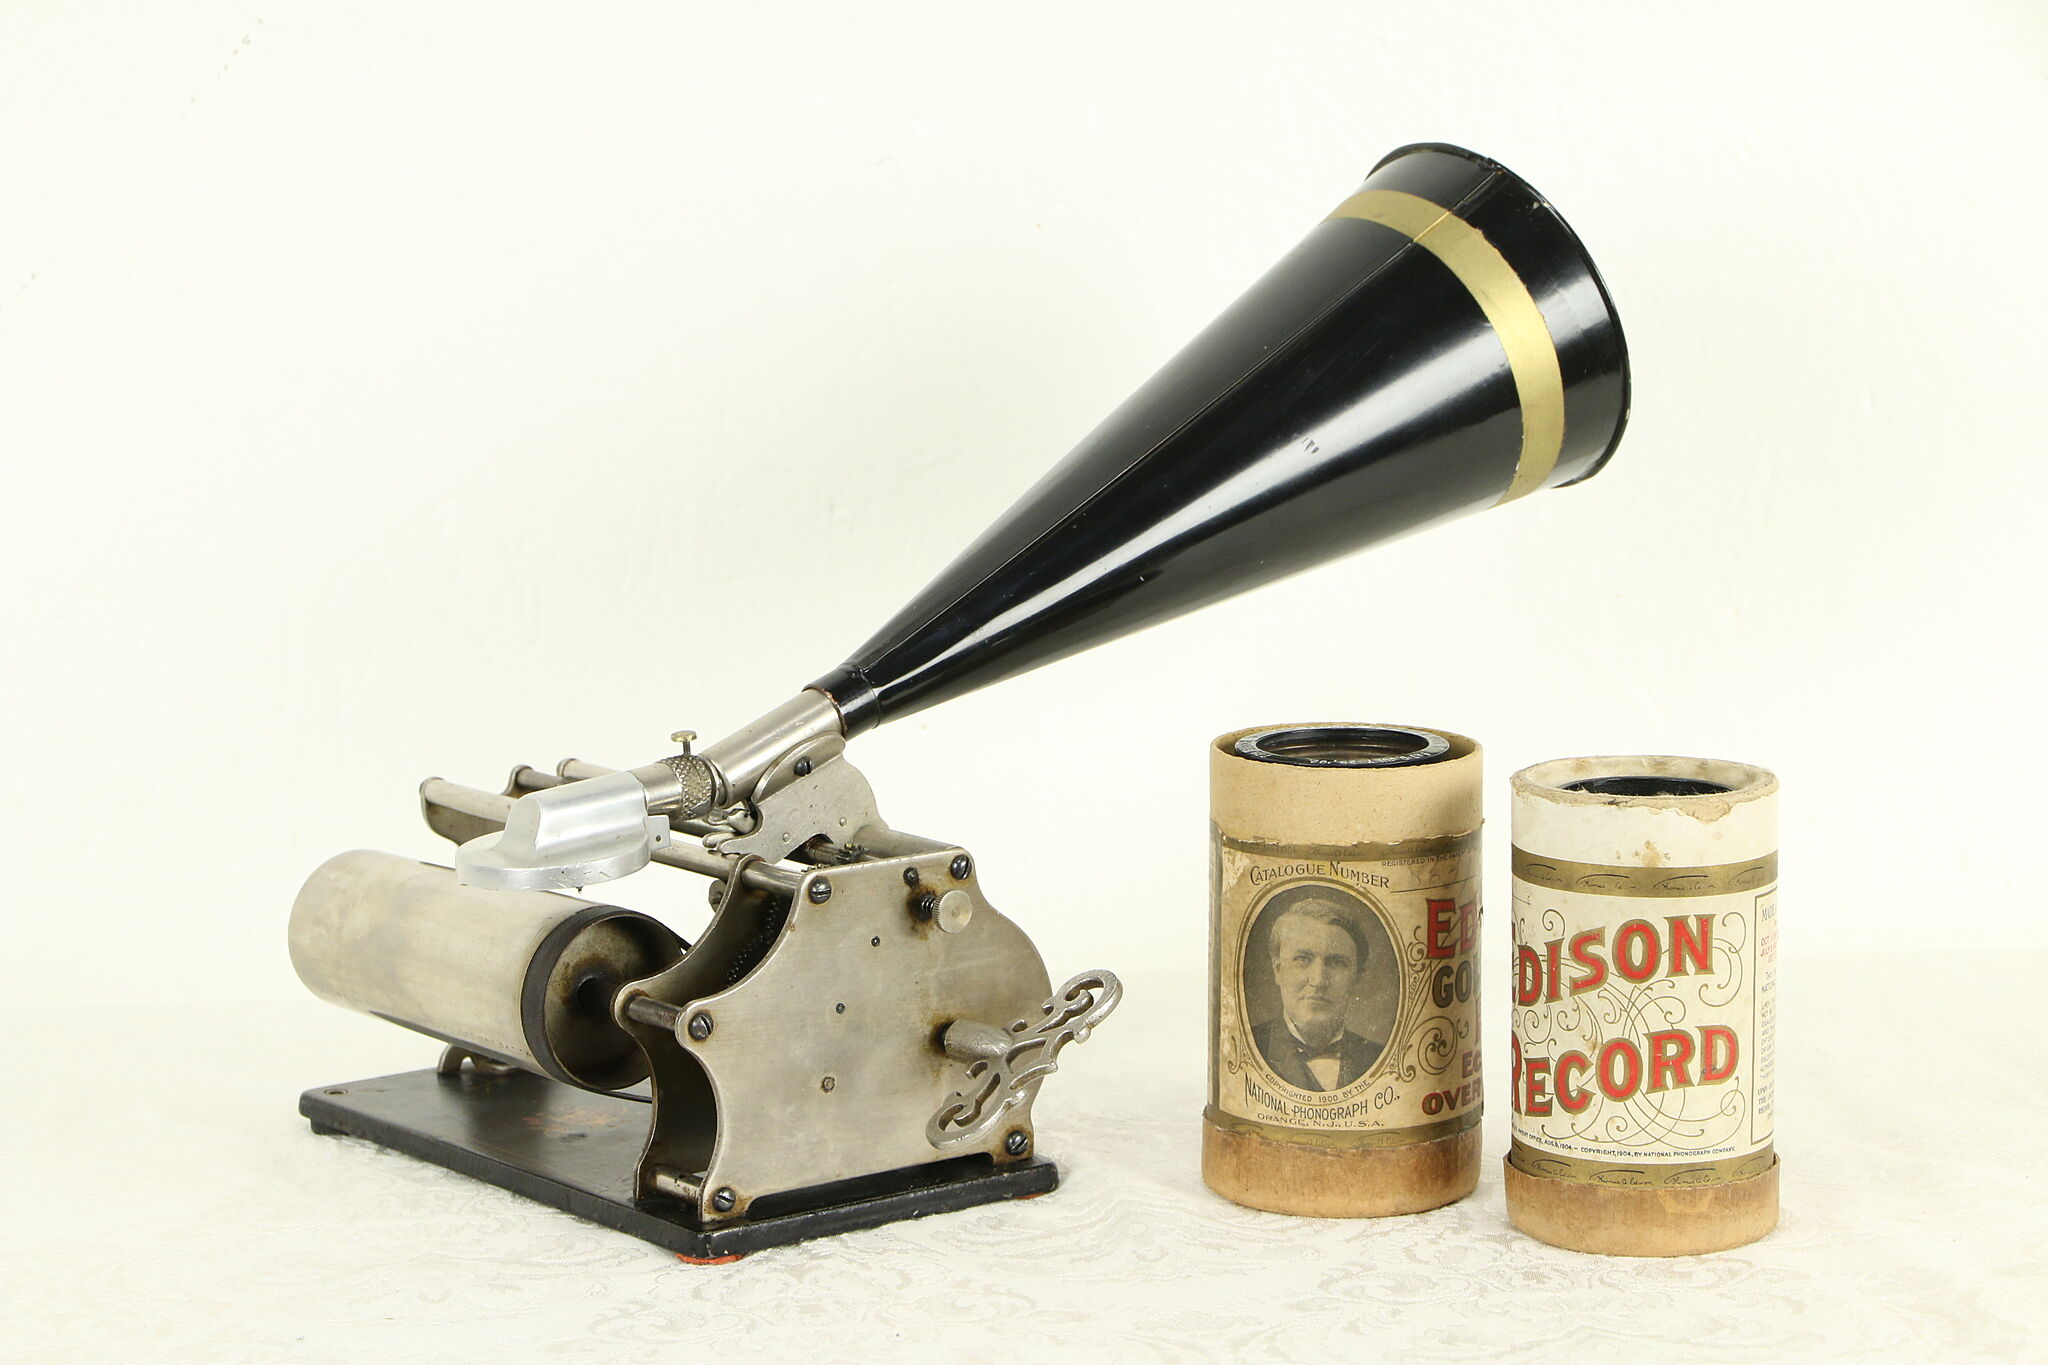 Columbia Disc and Cylinder Graphophones Phonograph Catalog 